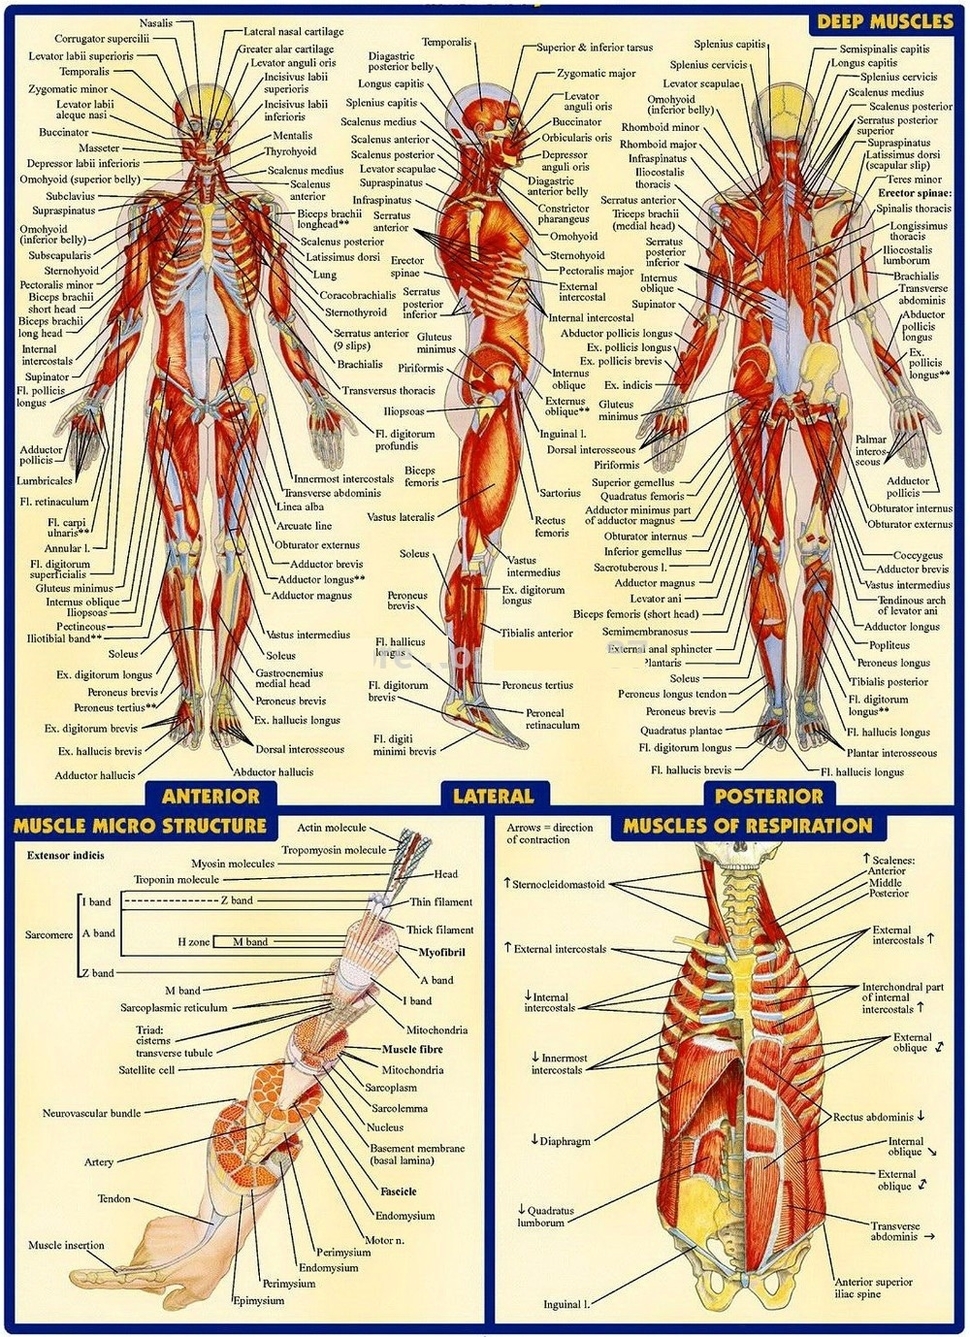 All human muscles diagram